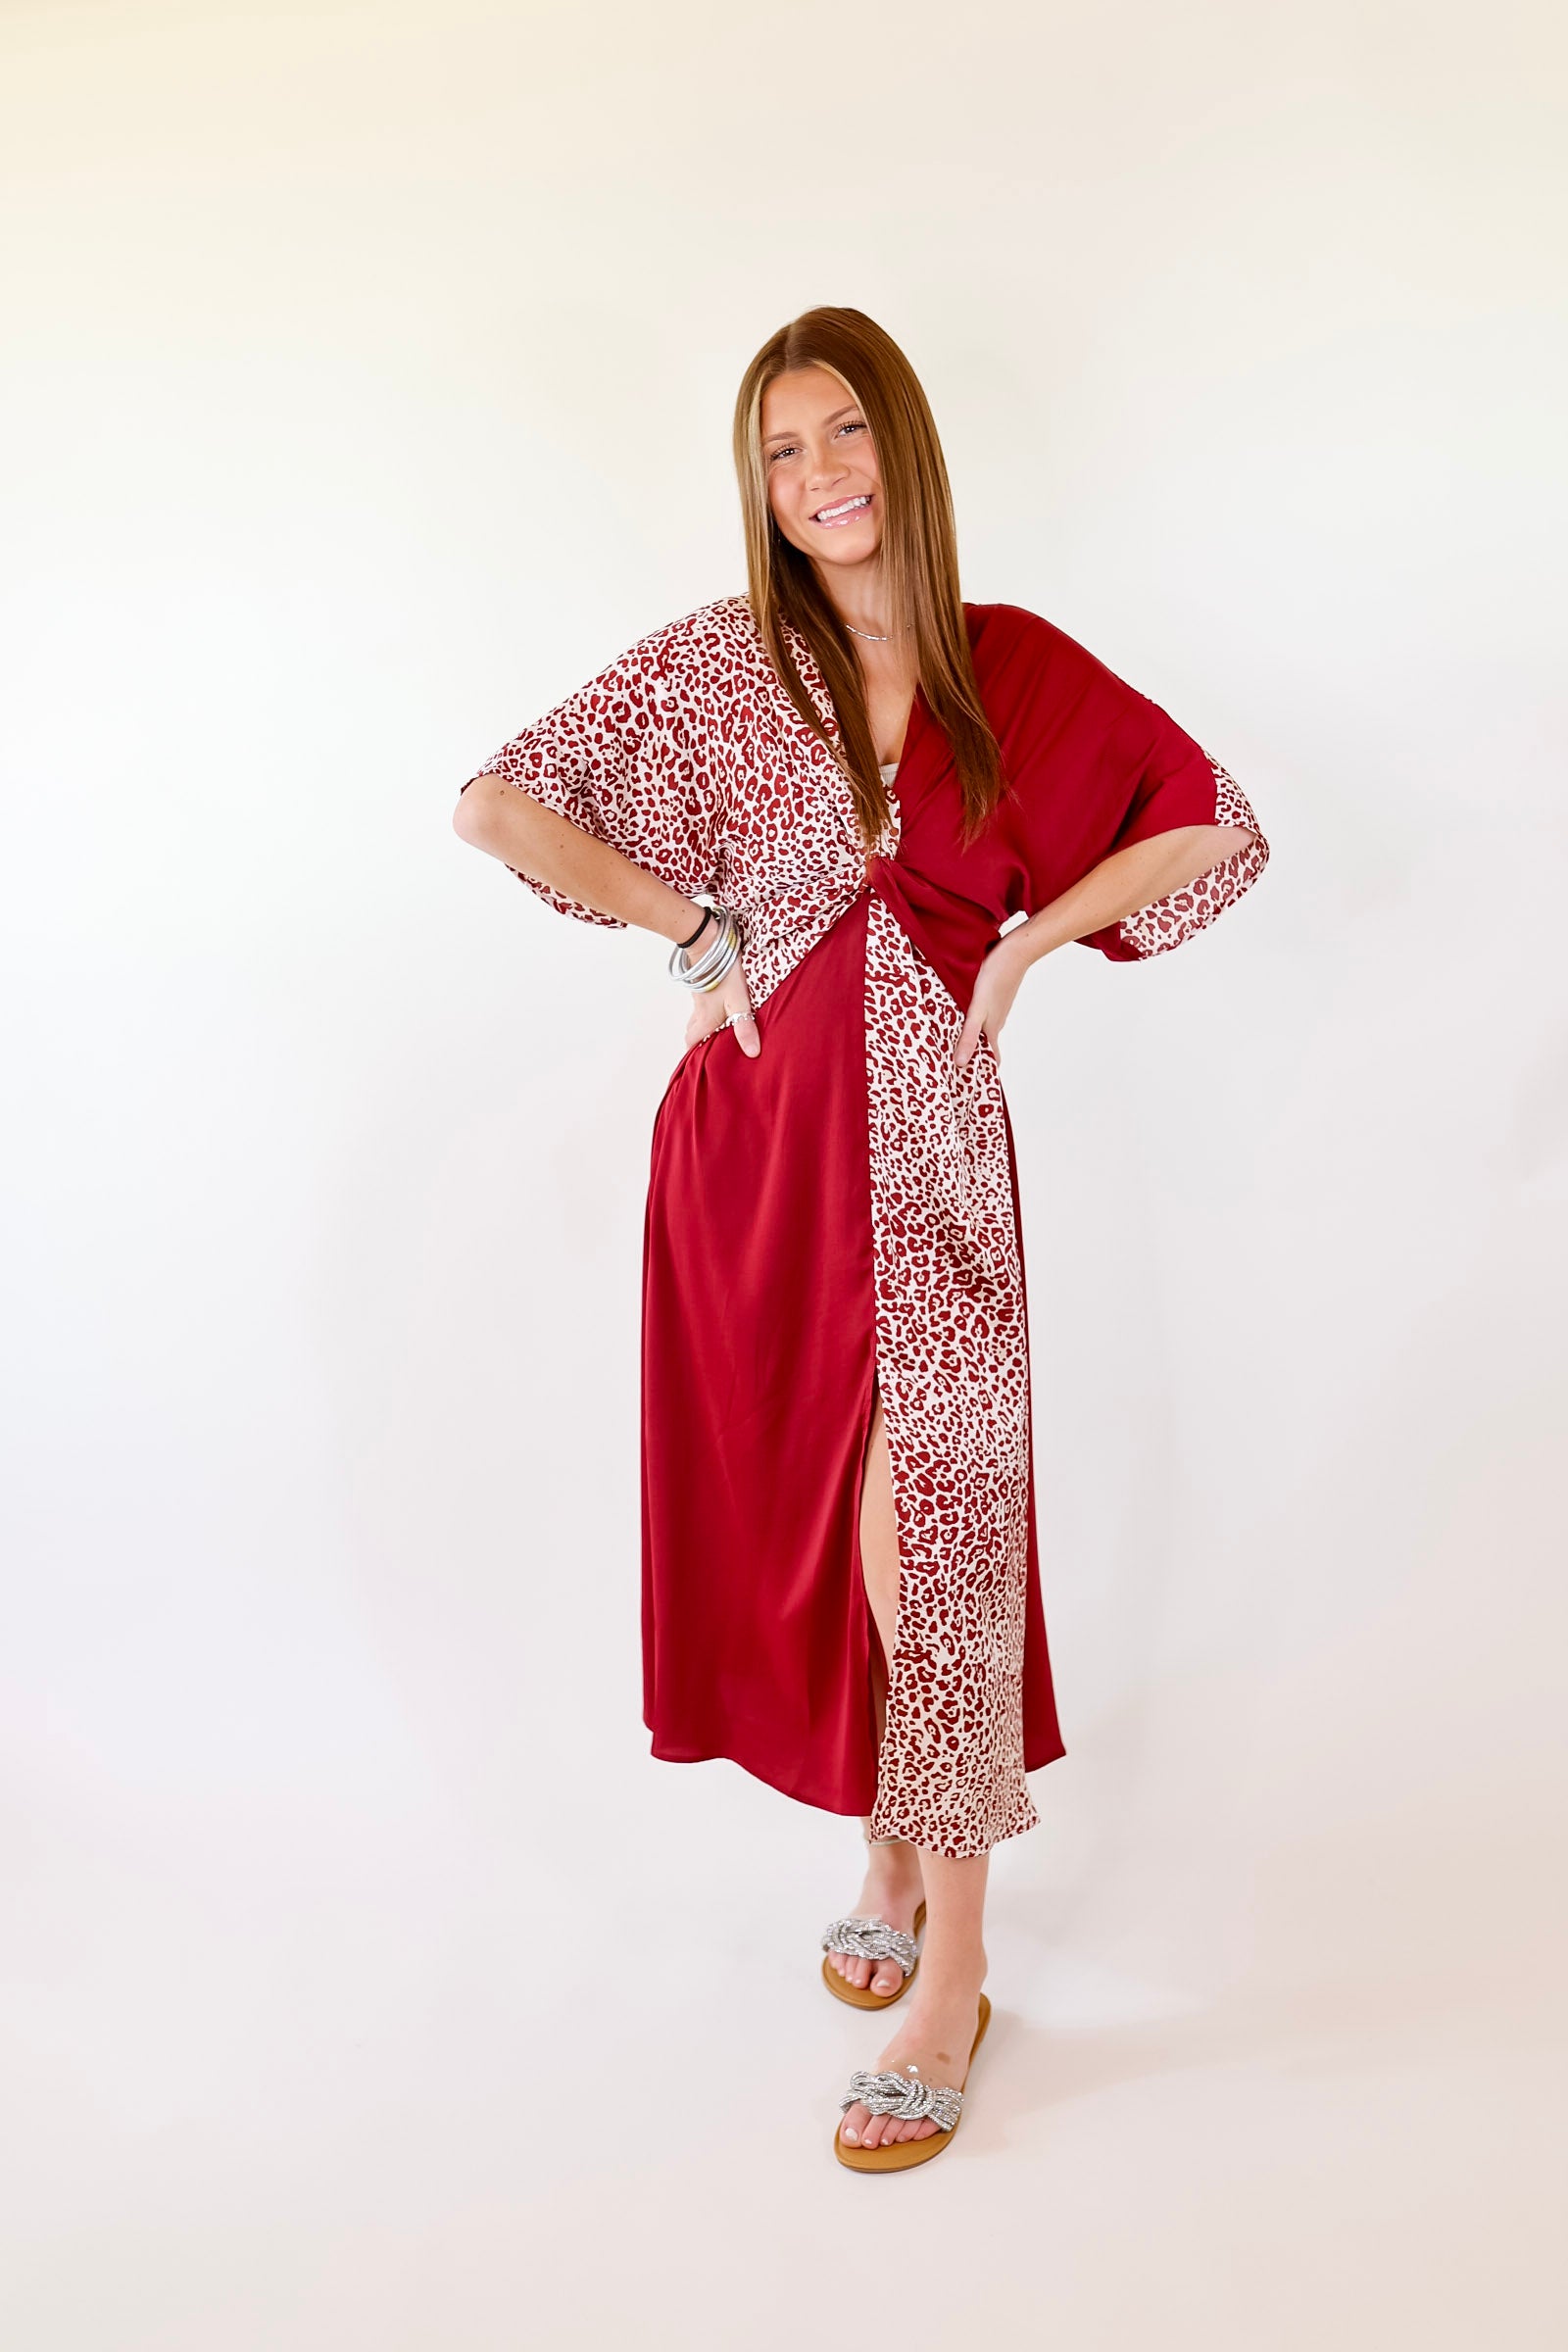 Take My Breath Away Front Knot Leopard Print Block Midi Dress in Maroon - Giddy Up Glamour Boutique